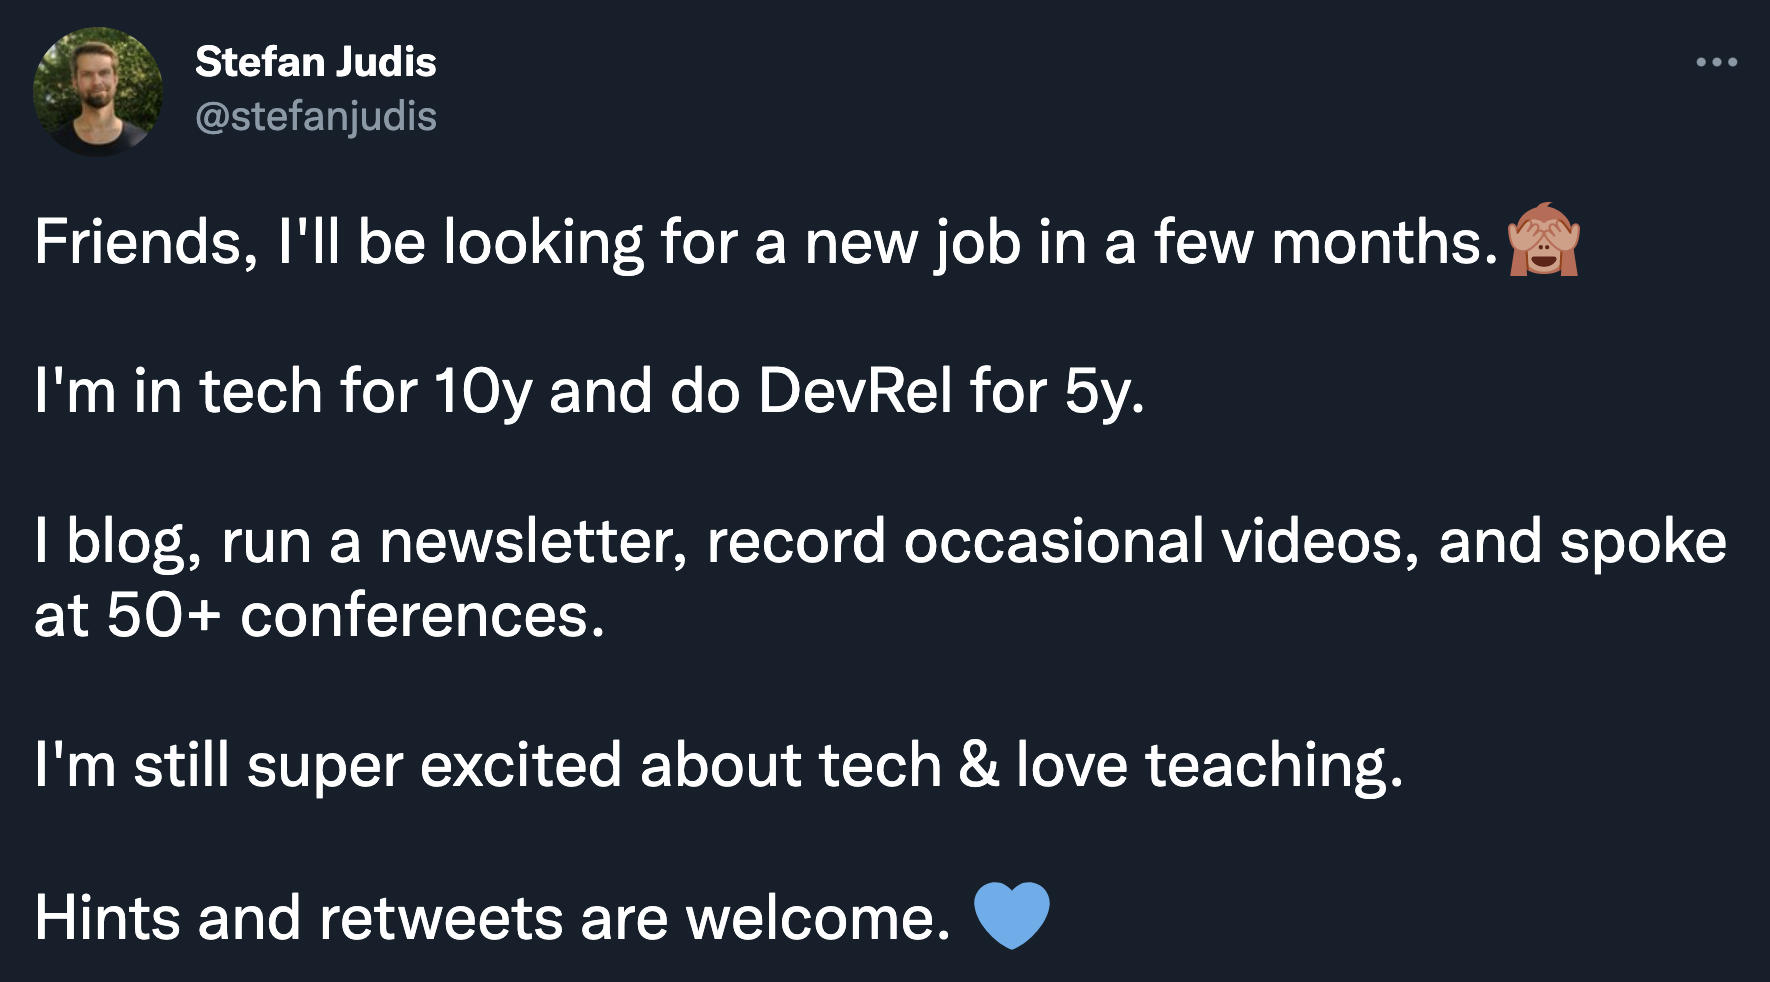 Tweet: Friends, I'll be looking for a new job in a few months. I'm in tech for 10y and do DevRel for 5y.  I blog, run a newsletter, record occasional videos, and spoke at 50+ conferences.  I'm still super excited about tech & love teaching.  Hints and retweets are welcome.